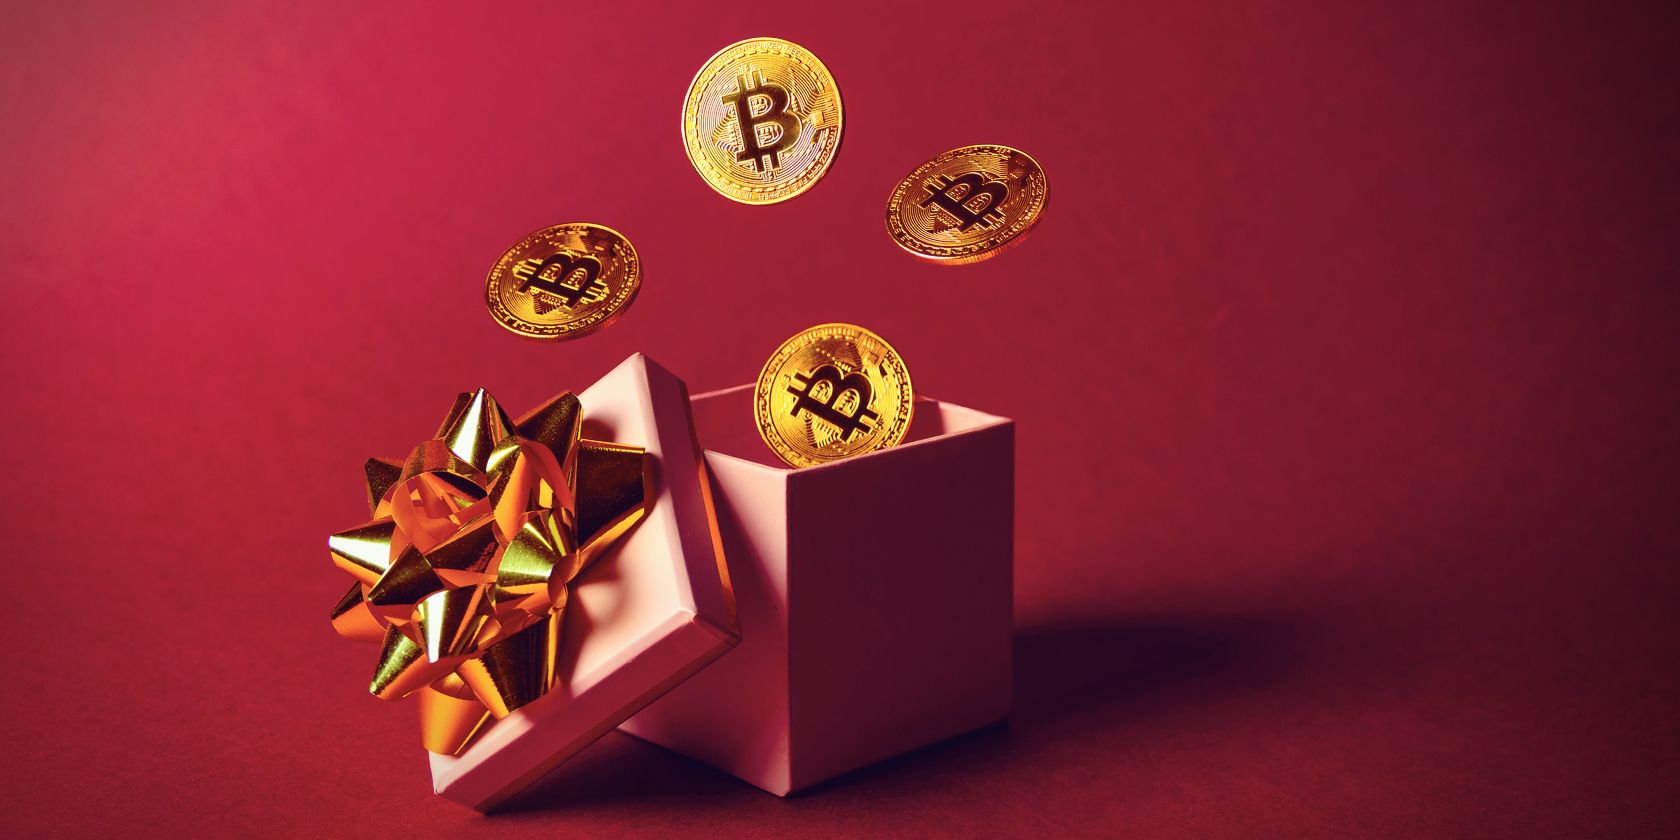 cryptocurrency gift card